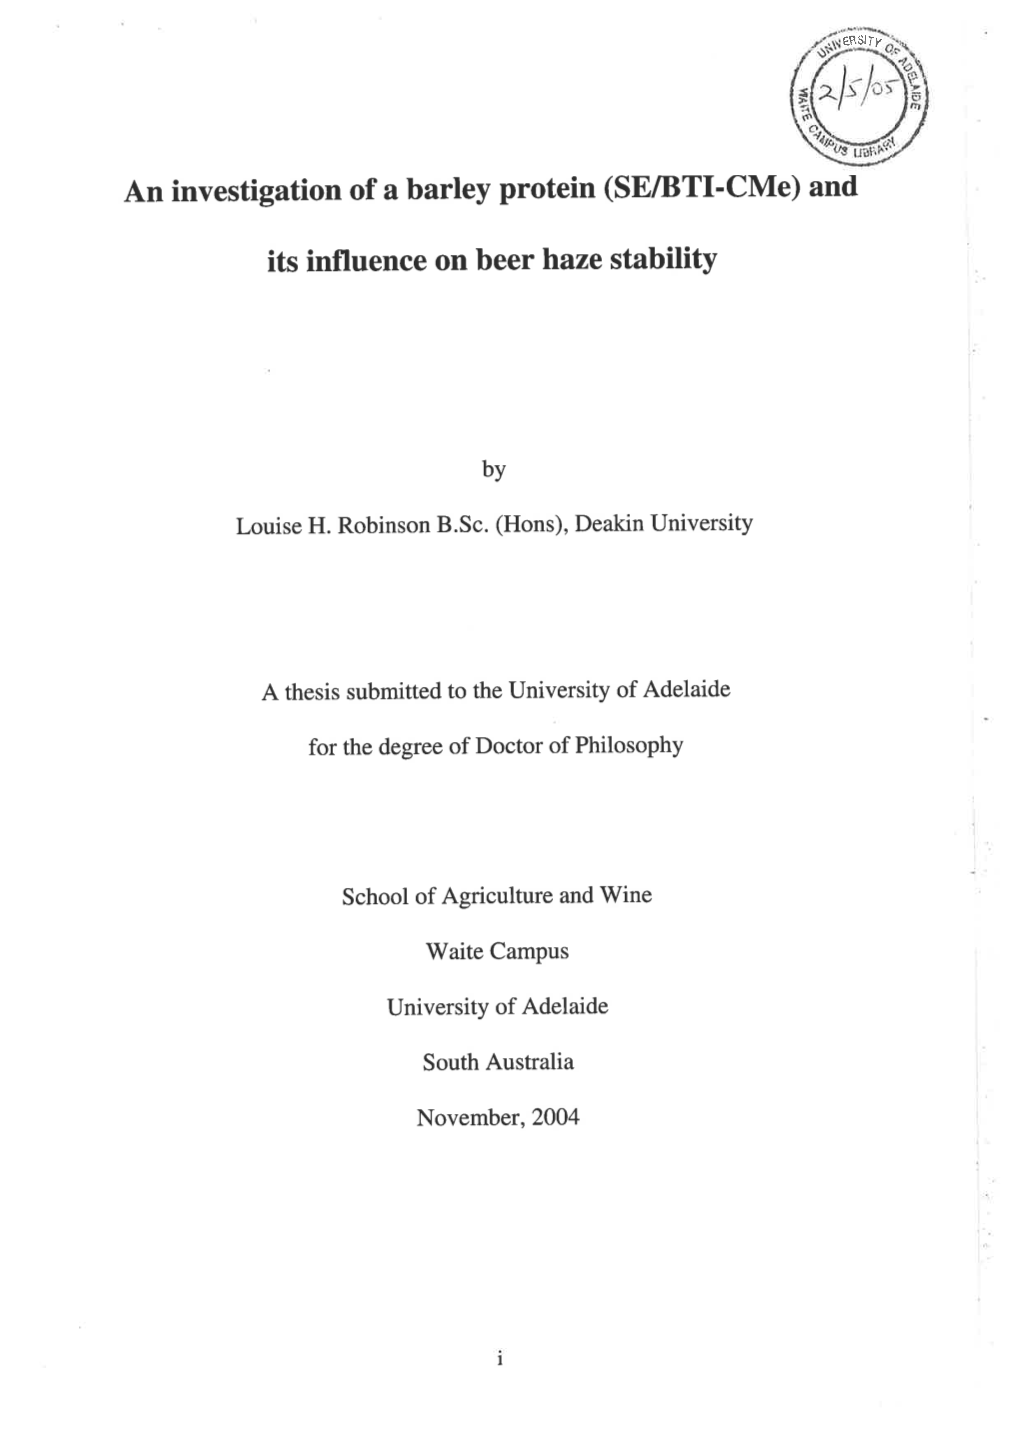 (SE/BTI-Cme) and Its Influence on Beer Haze Stability